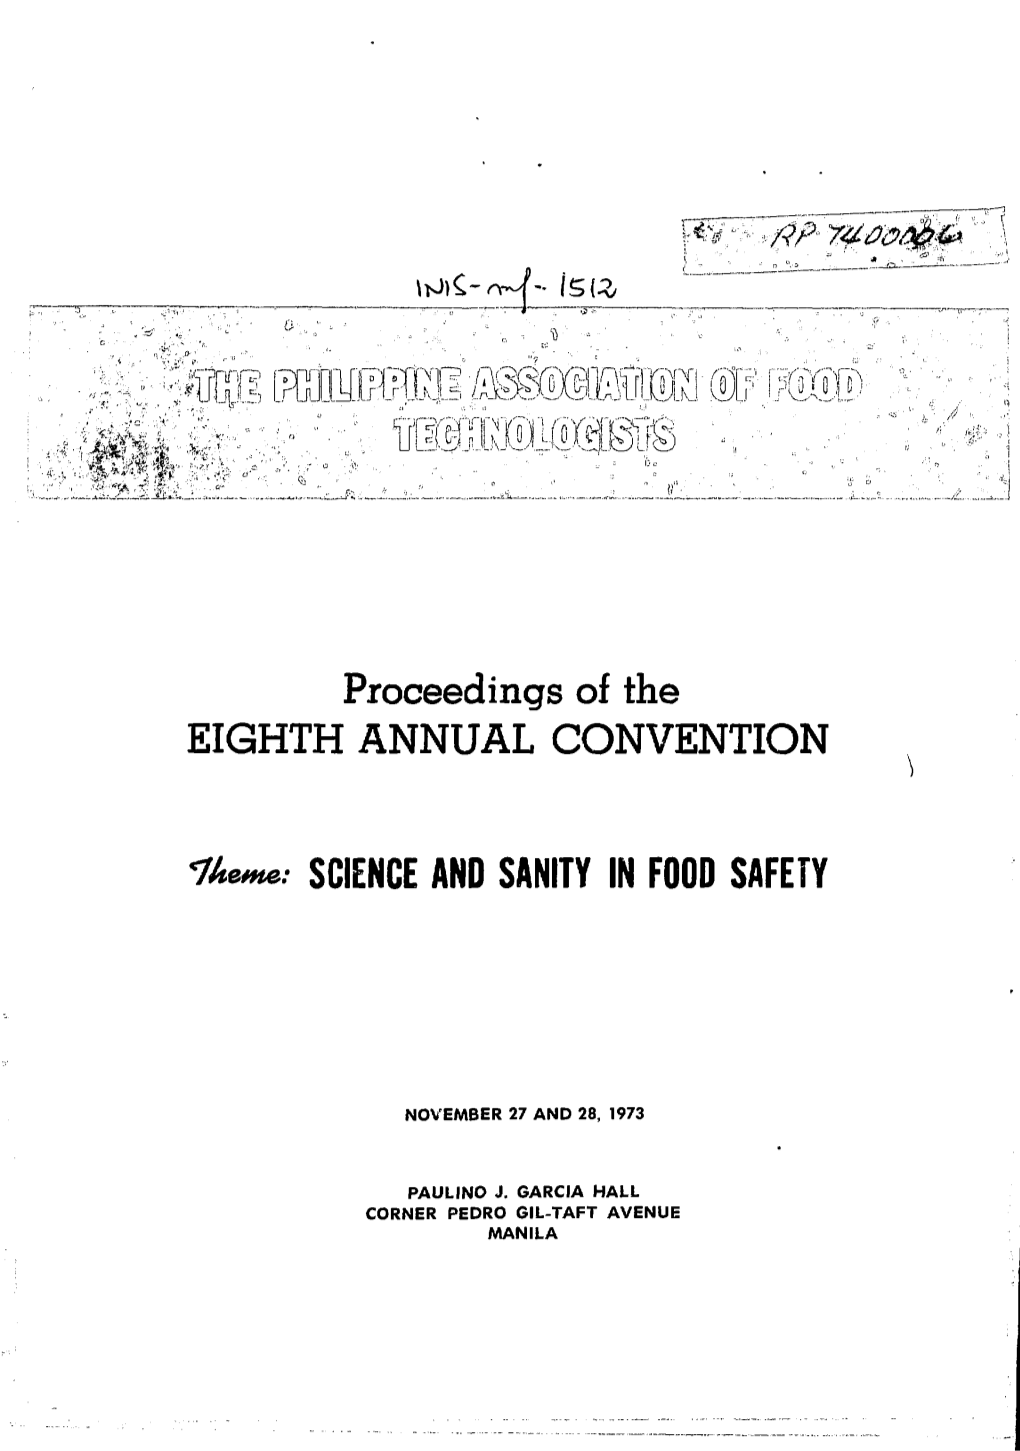 Proceedings of the EIGHTH ANNUAL CONVENTION , SCIENCE AND